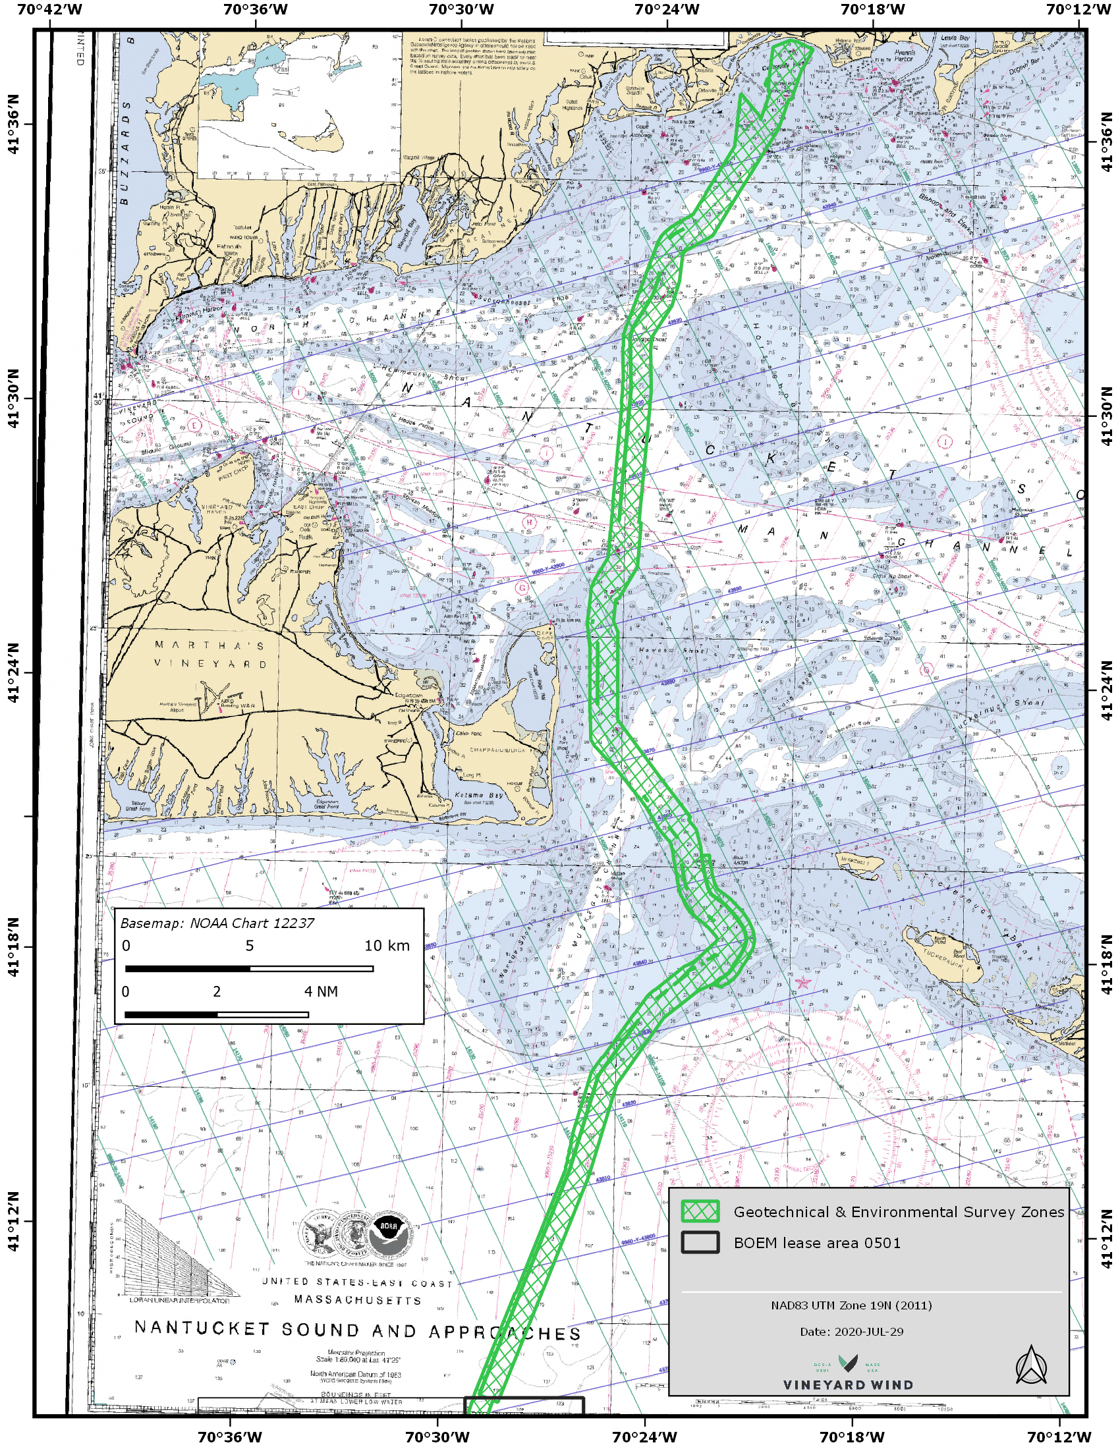 Offshore Export Cable Corridor through Muskeget Channel and Nantucket Sound